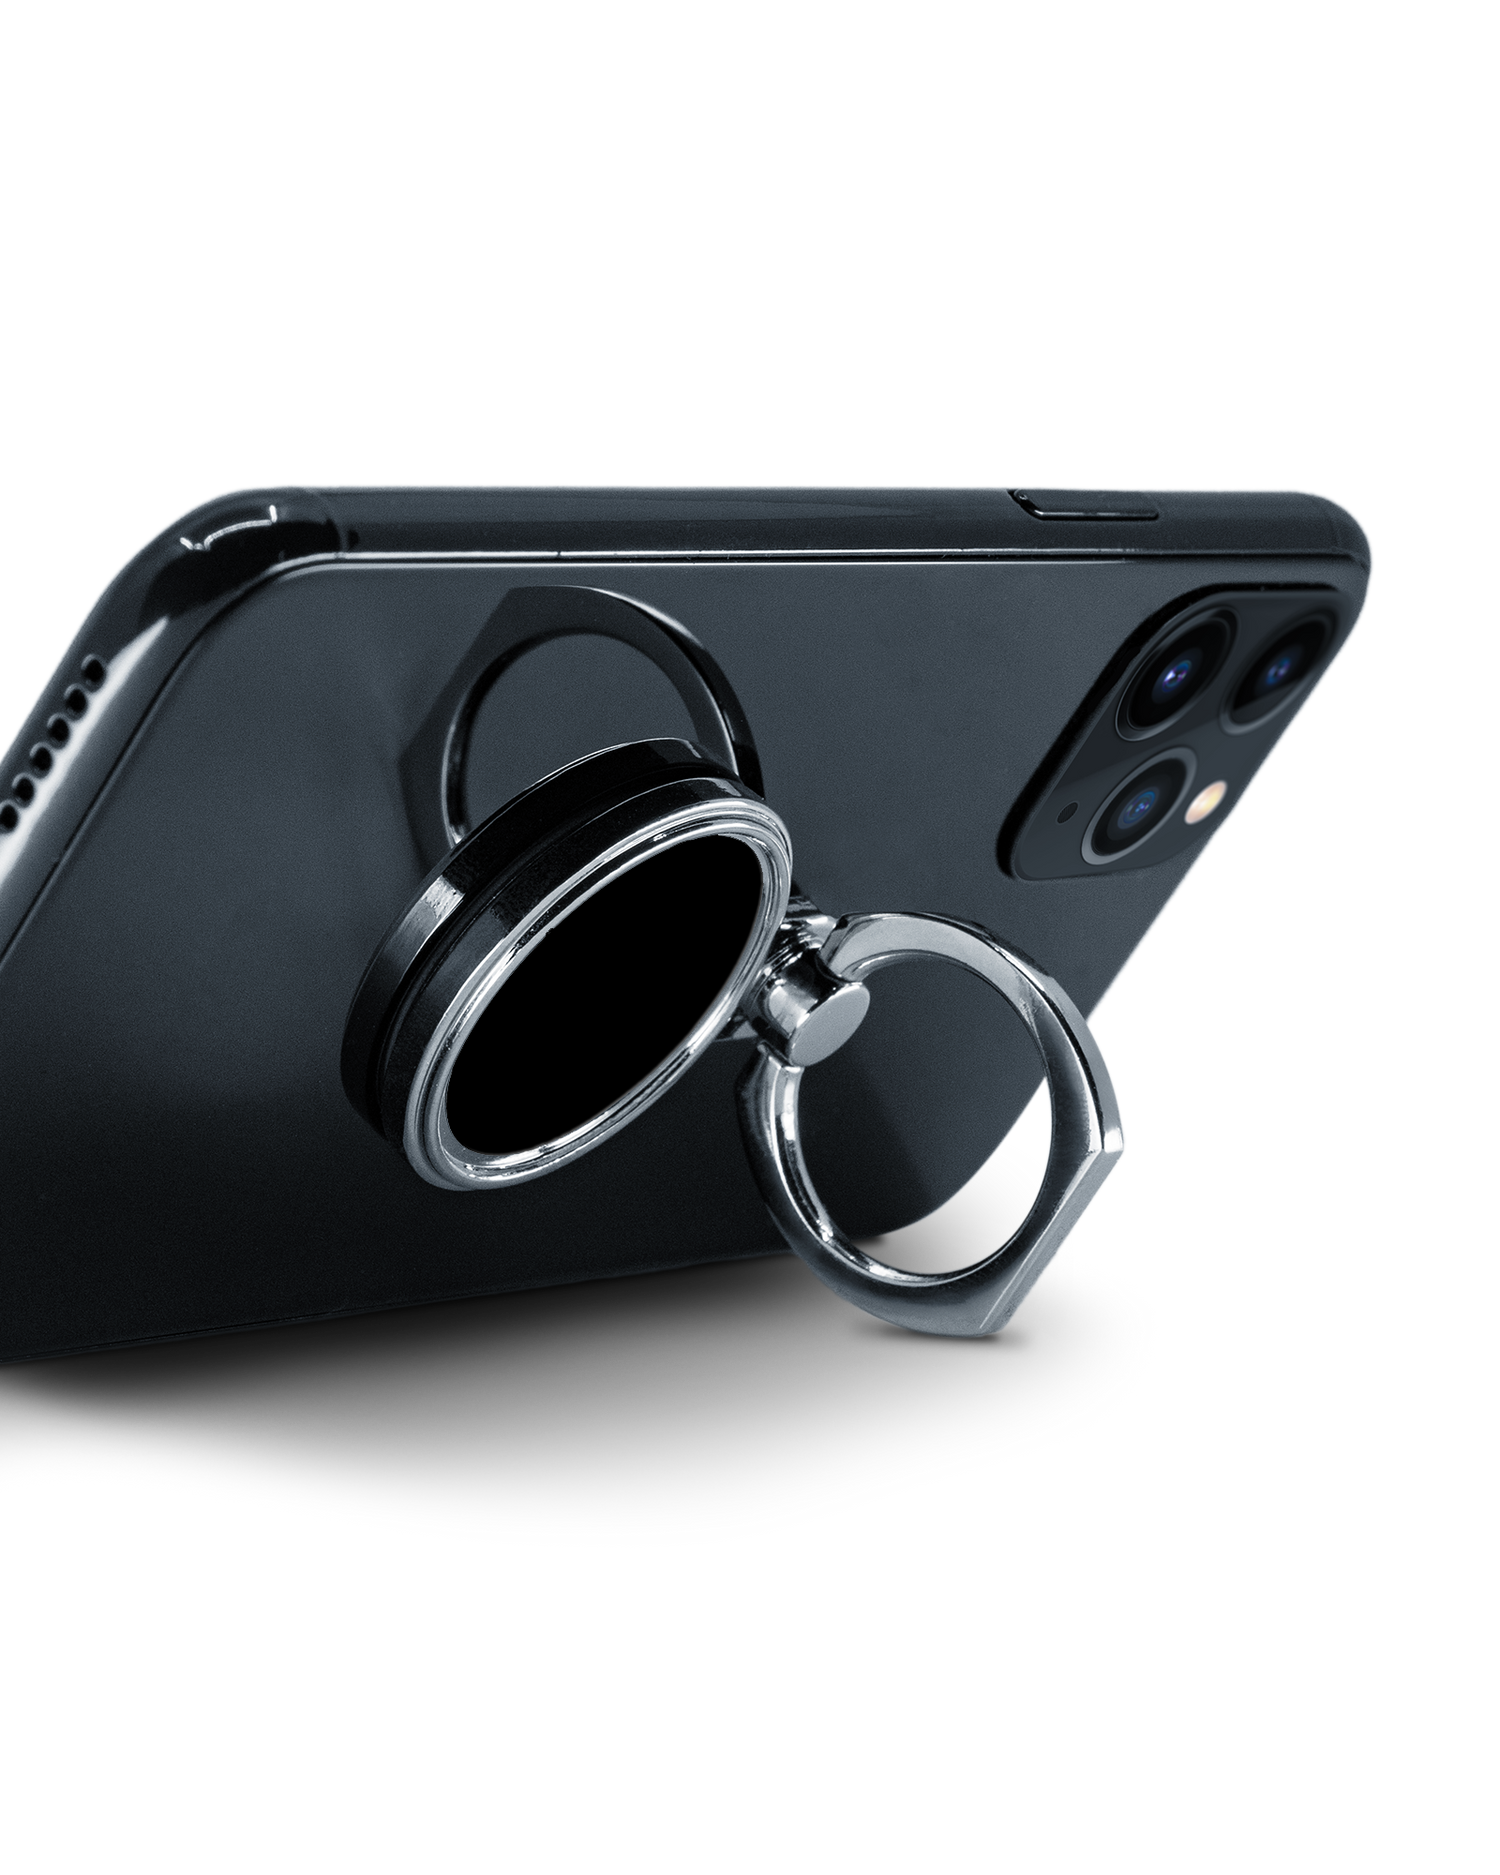 BLACK Ring Holder attached to a smartphone